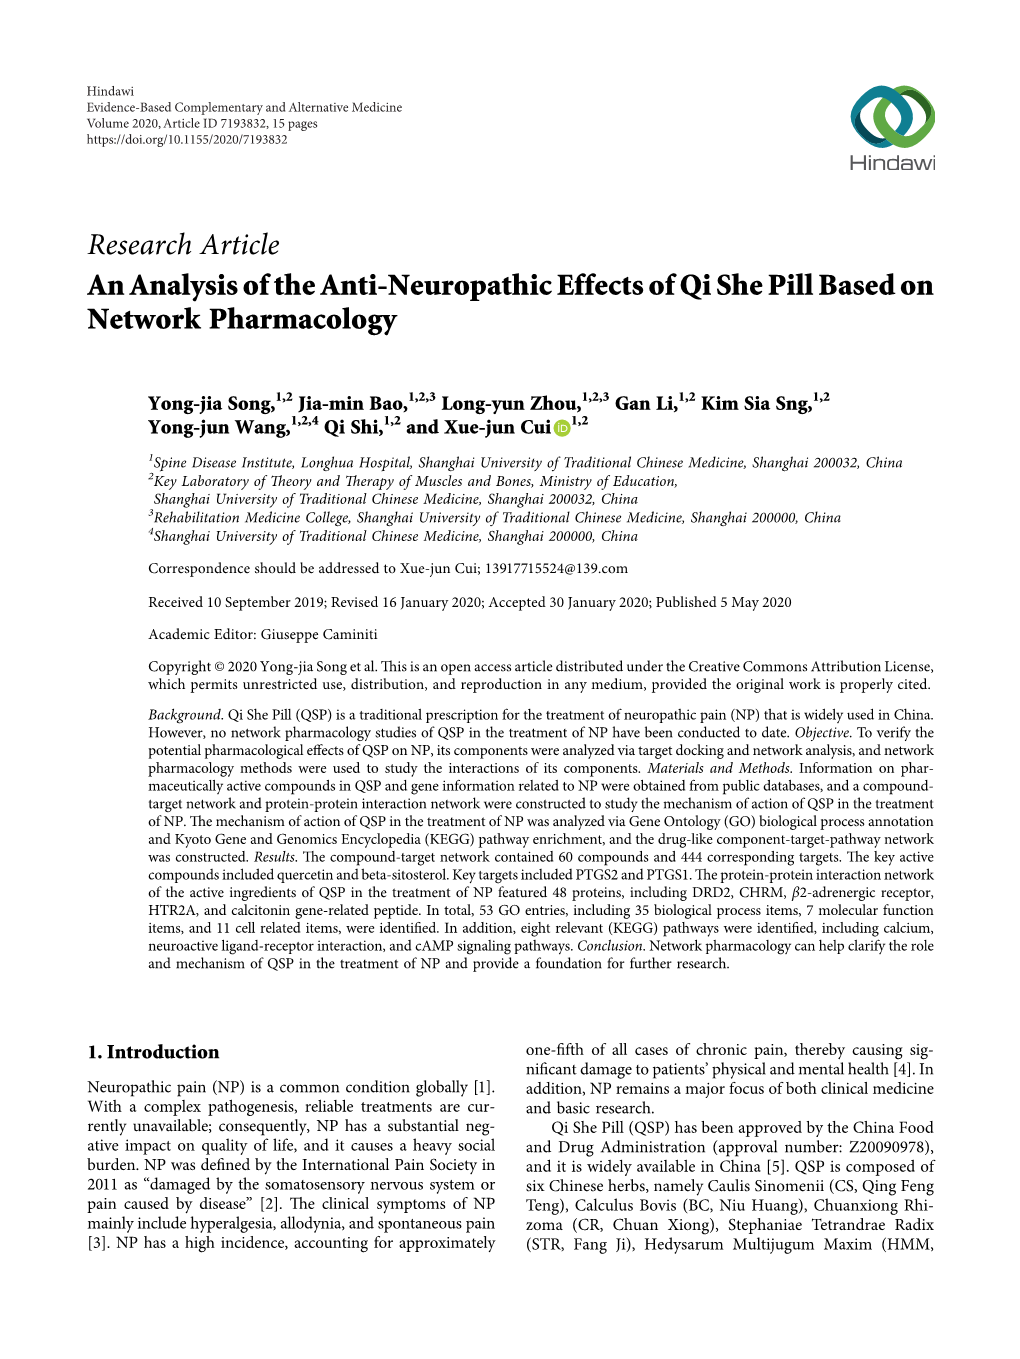 An Analysis of the Anti-Neuropathic Effects of Qi She Pill Based on Network Pharmacology